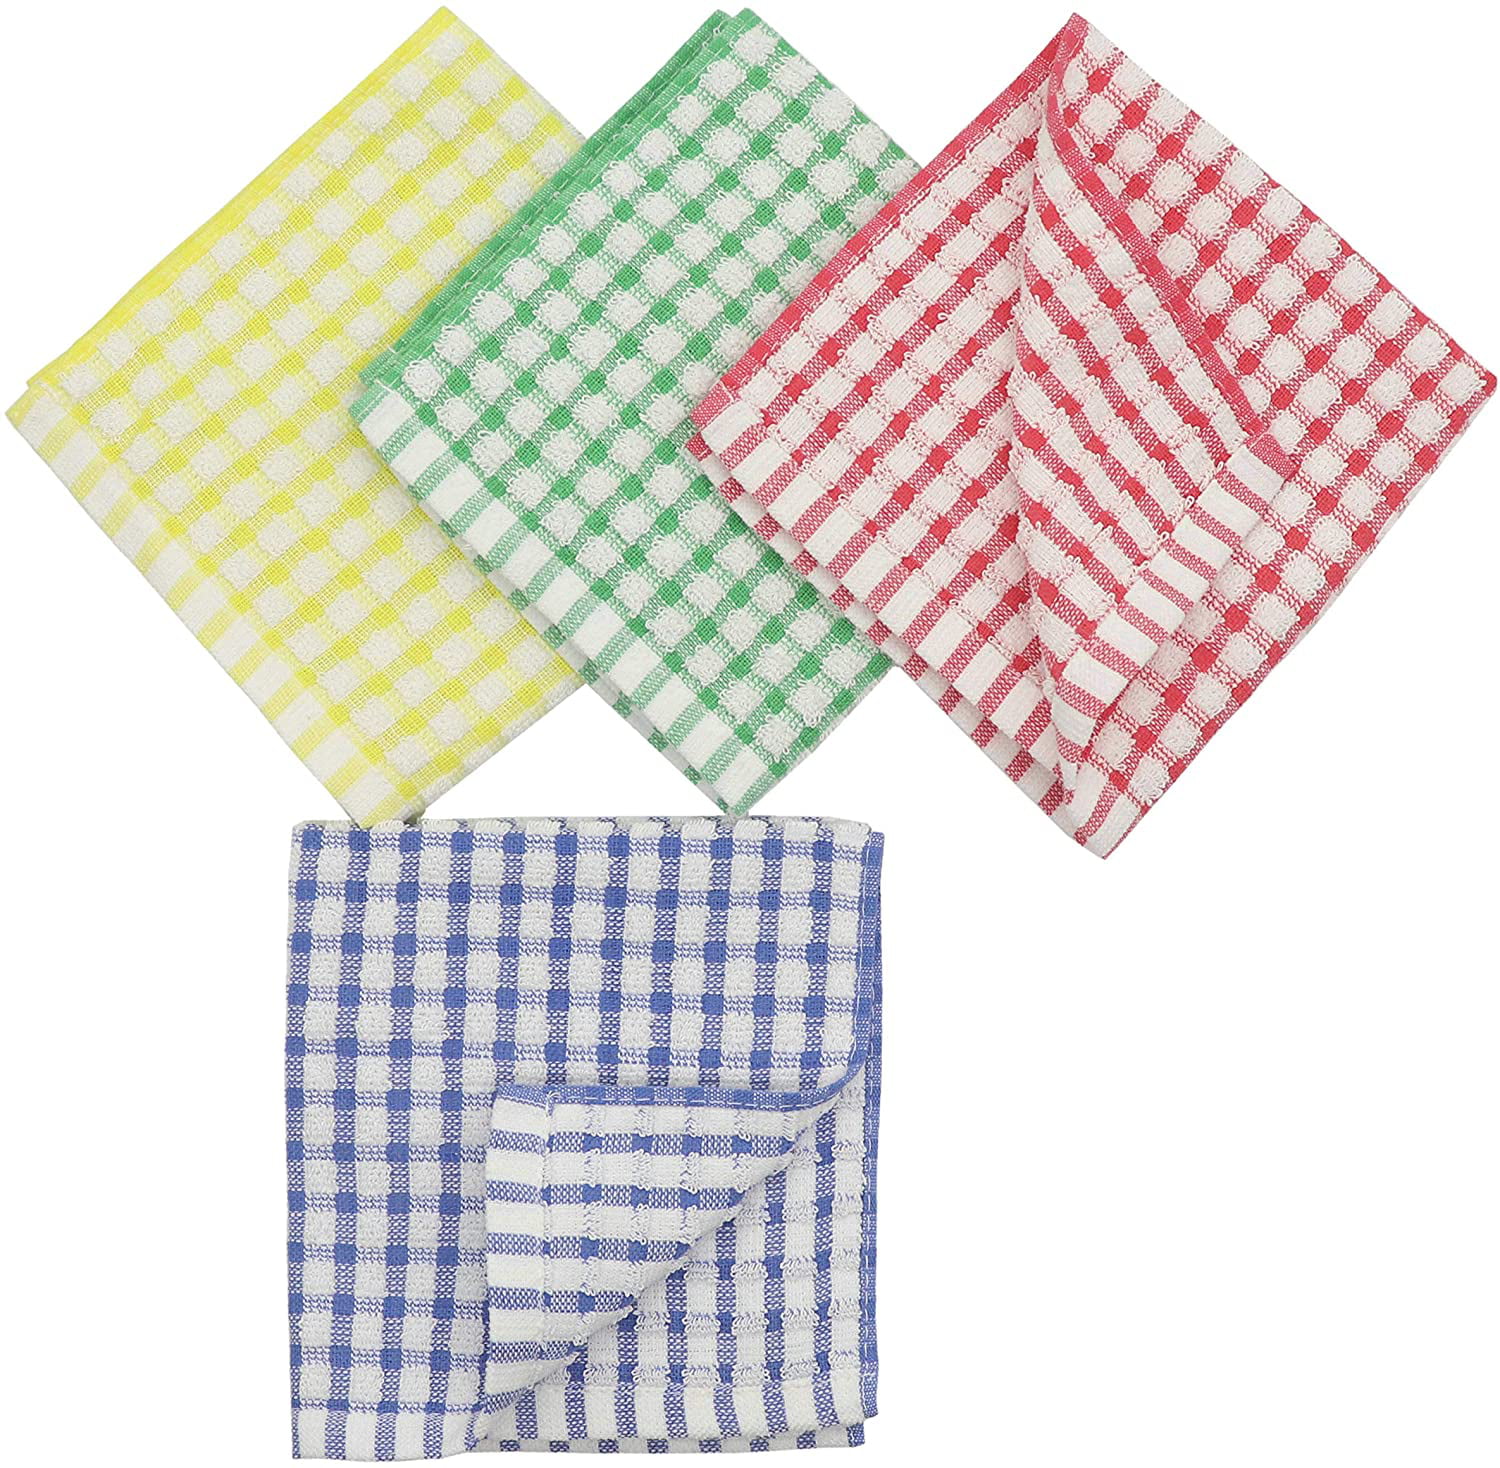 Foeses Kitchen Dish Towels 9 Pack, Bulk Cotton Kitchen Towels and Dishcloths Set, Dish Cloths for Washing Dishes Dish Rags for Drying Dishes Kitchen